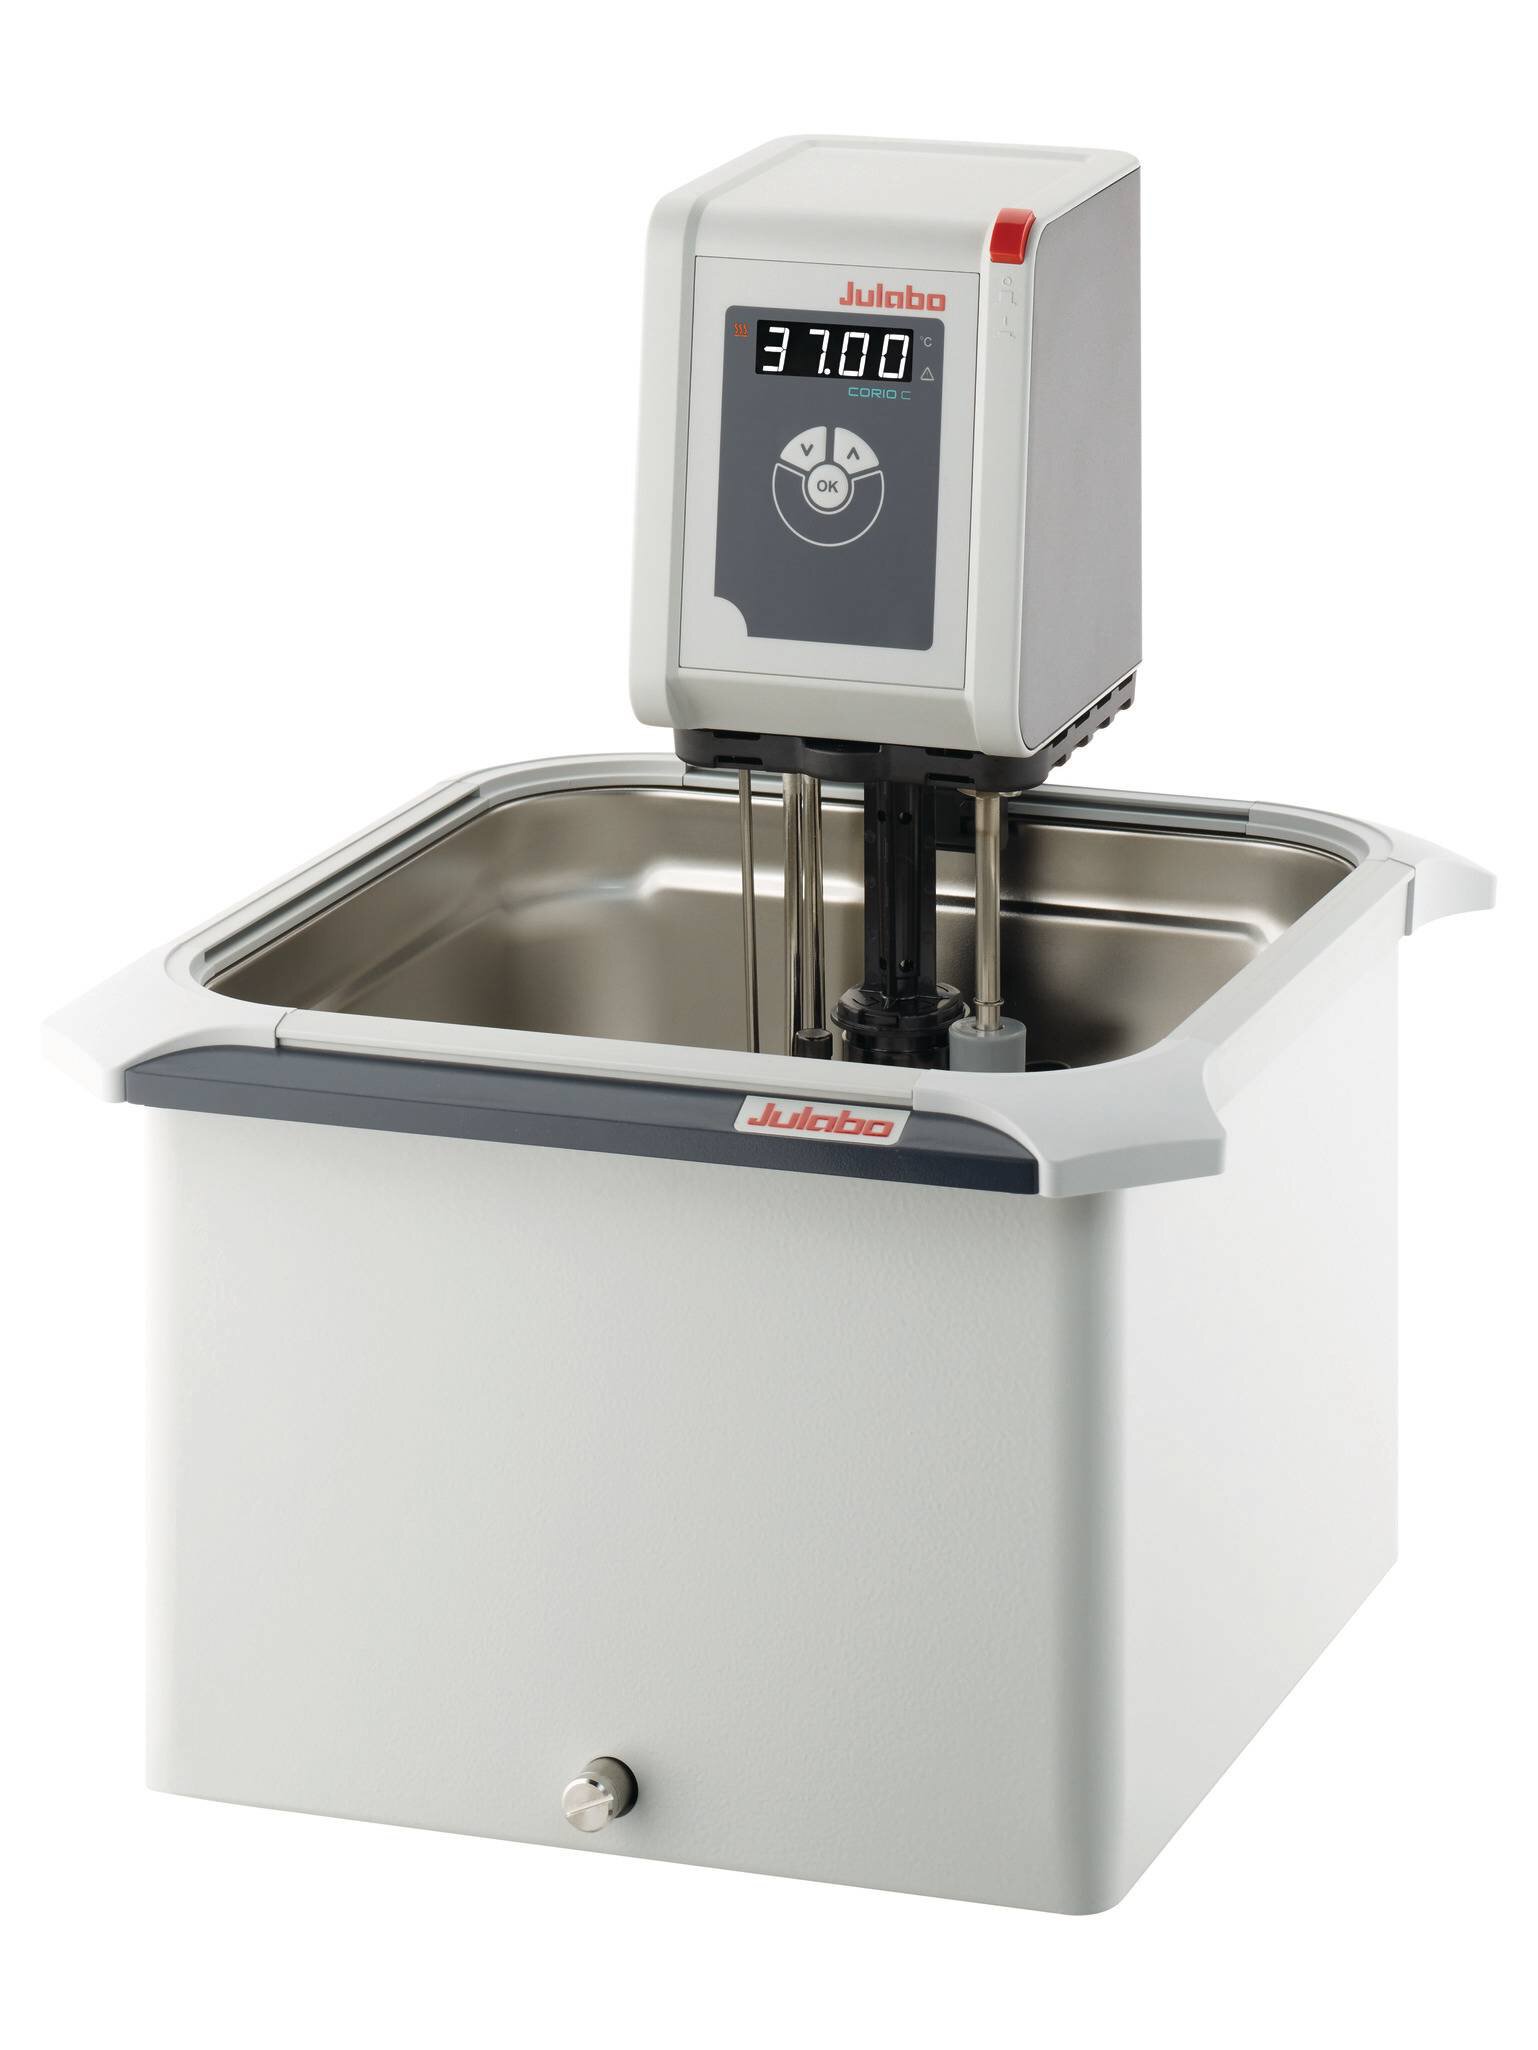 Open heating bath circulator with stainless steel bath tank CORIO C-B17 from JULABO view 1